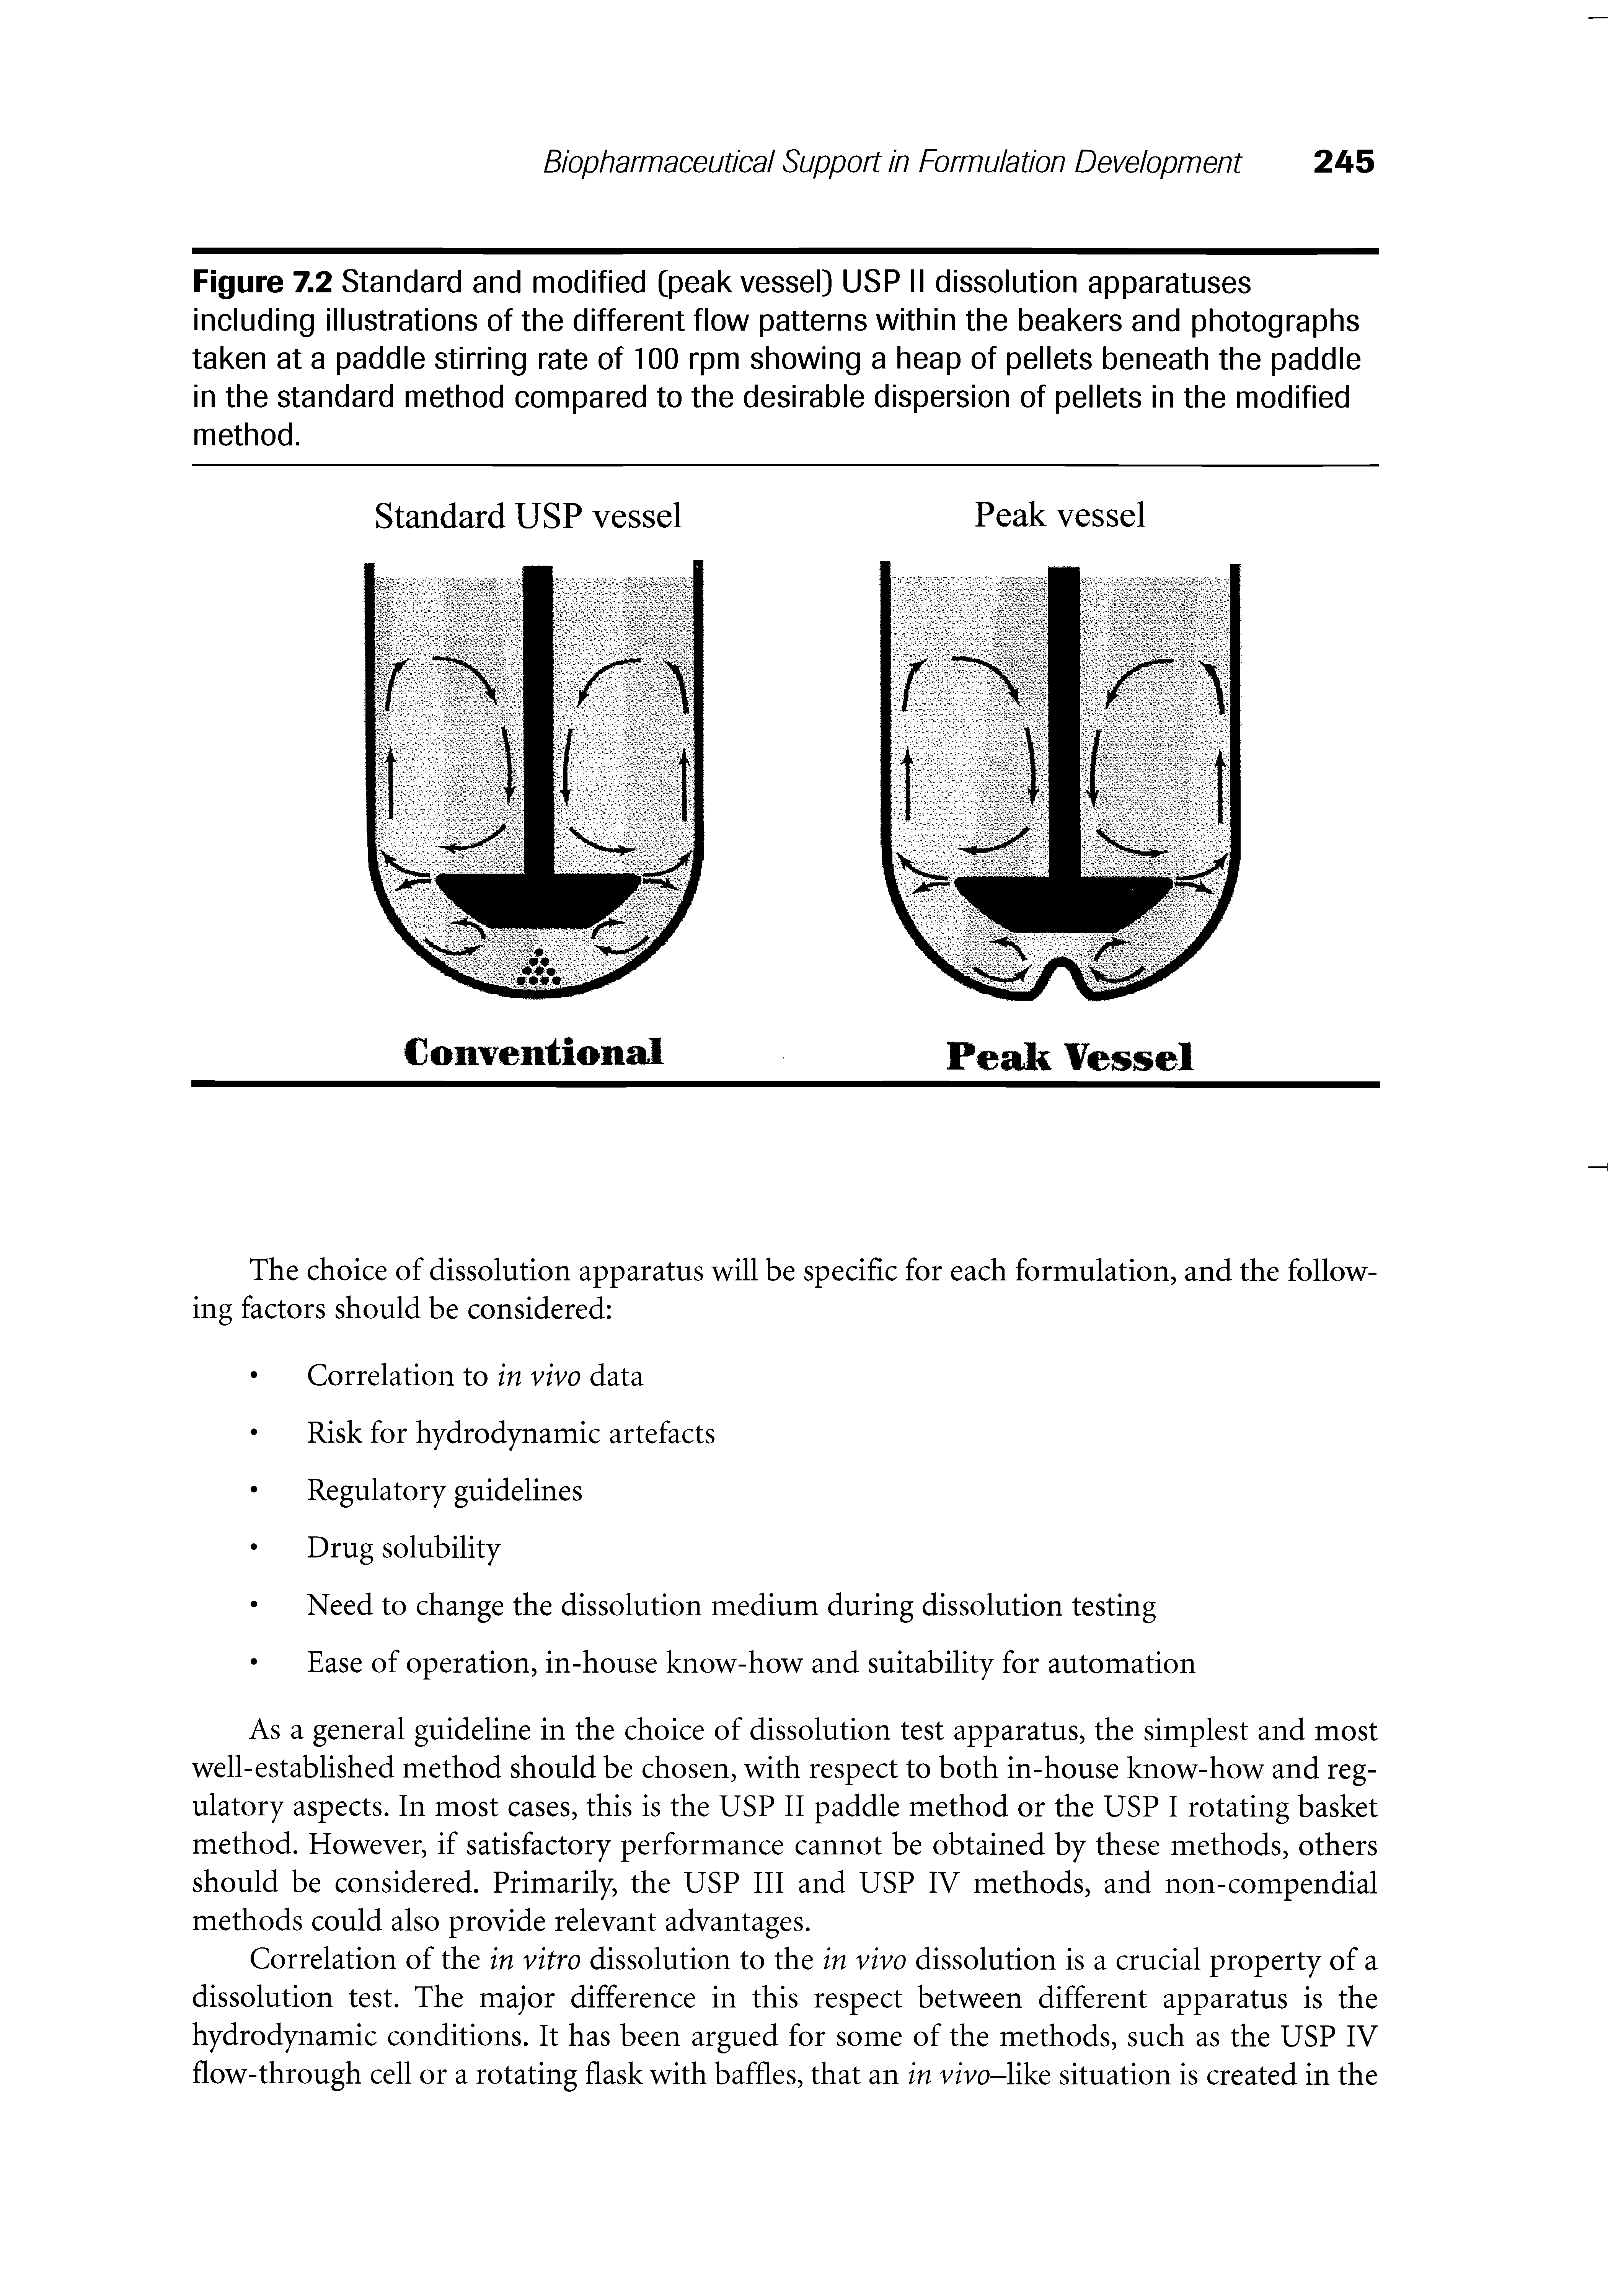 Figure 7.2 Standard and modified Cpeak vessel) USP II dissolution apparatuses including illustrations of the different flow patterns within the beakers and photographs taken at a paddle stirring rate of 100 rpm showing a heap of pellets beneath the paddle in the standard method compared to the desirable dispersion of pellets in the modified method.